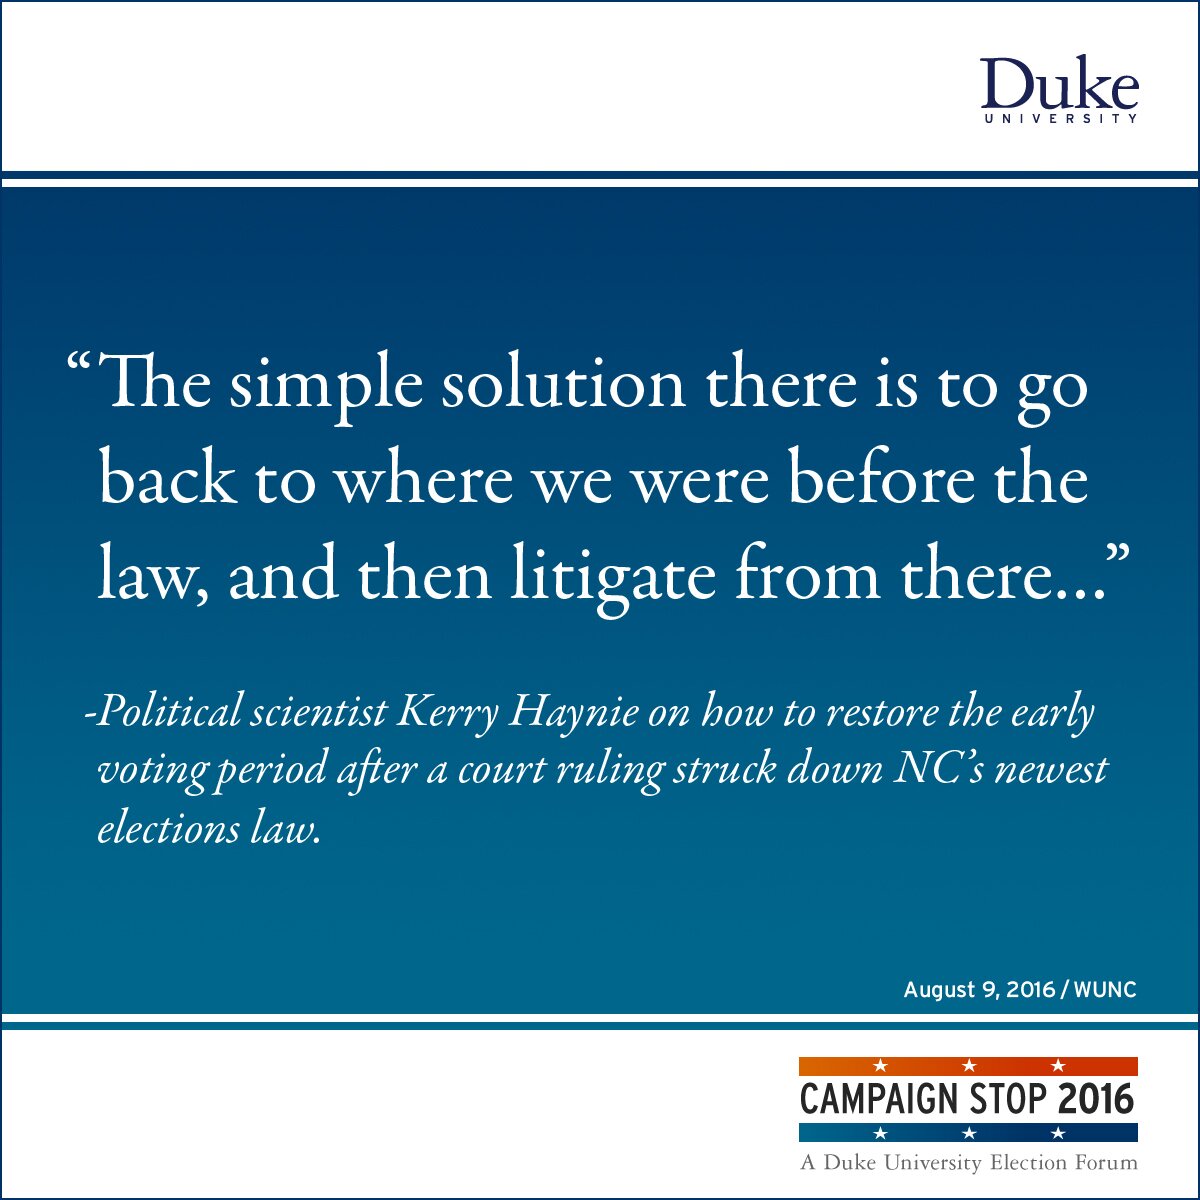 “The simple solution there is to go back to where we were before the law, and then litigate from there…” -Political scientist Kerry Haynie on how to restore the early voting period after a court ruling struck down NC’s newest elections law.